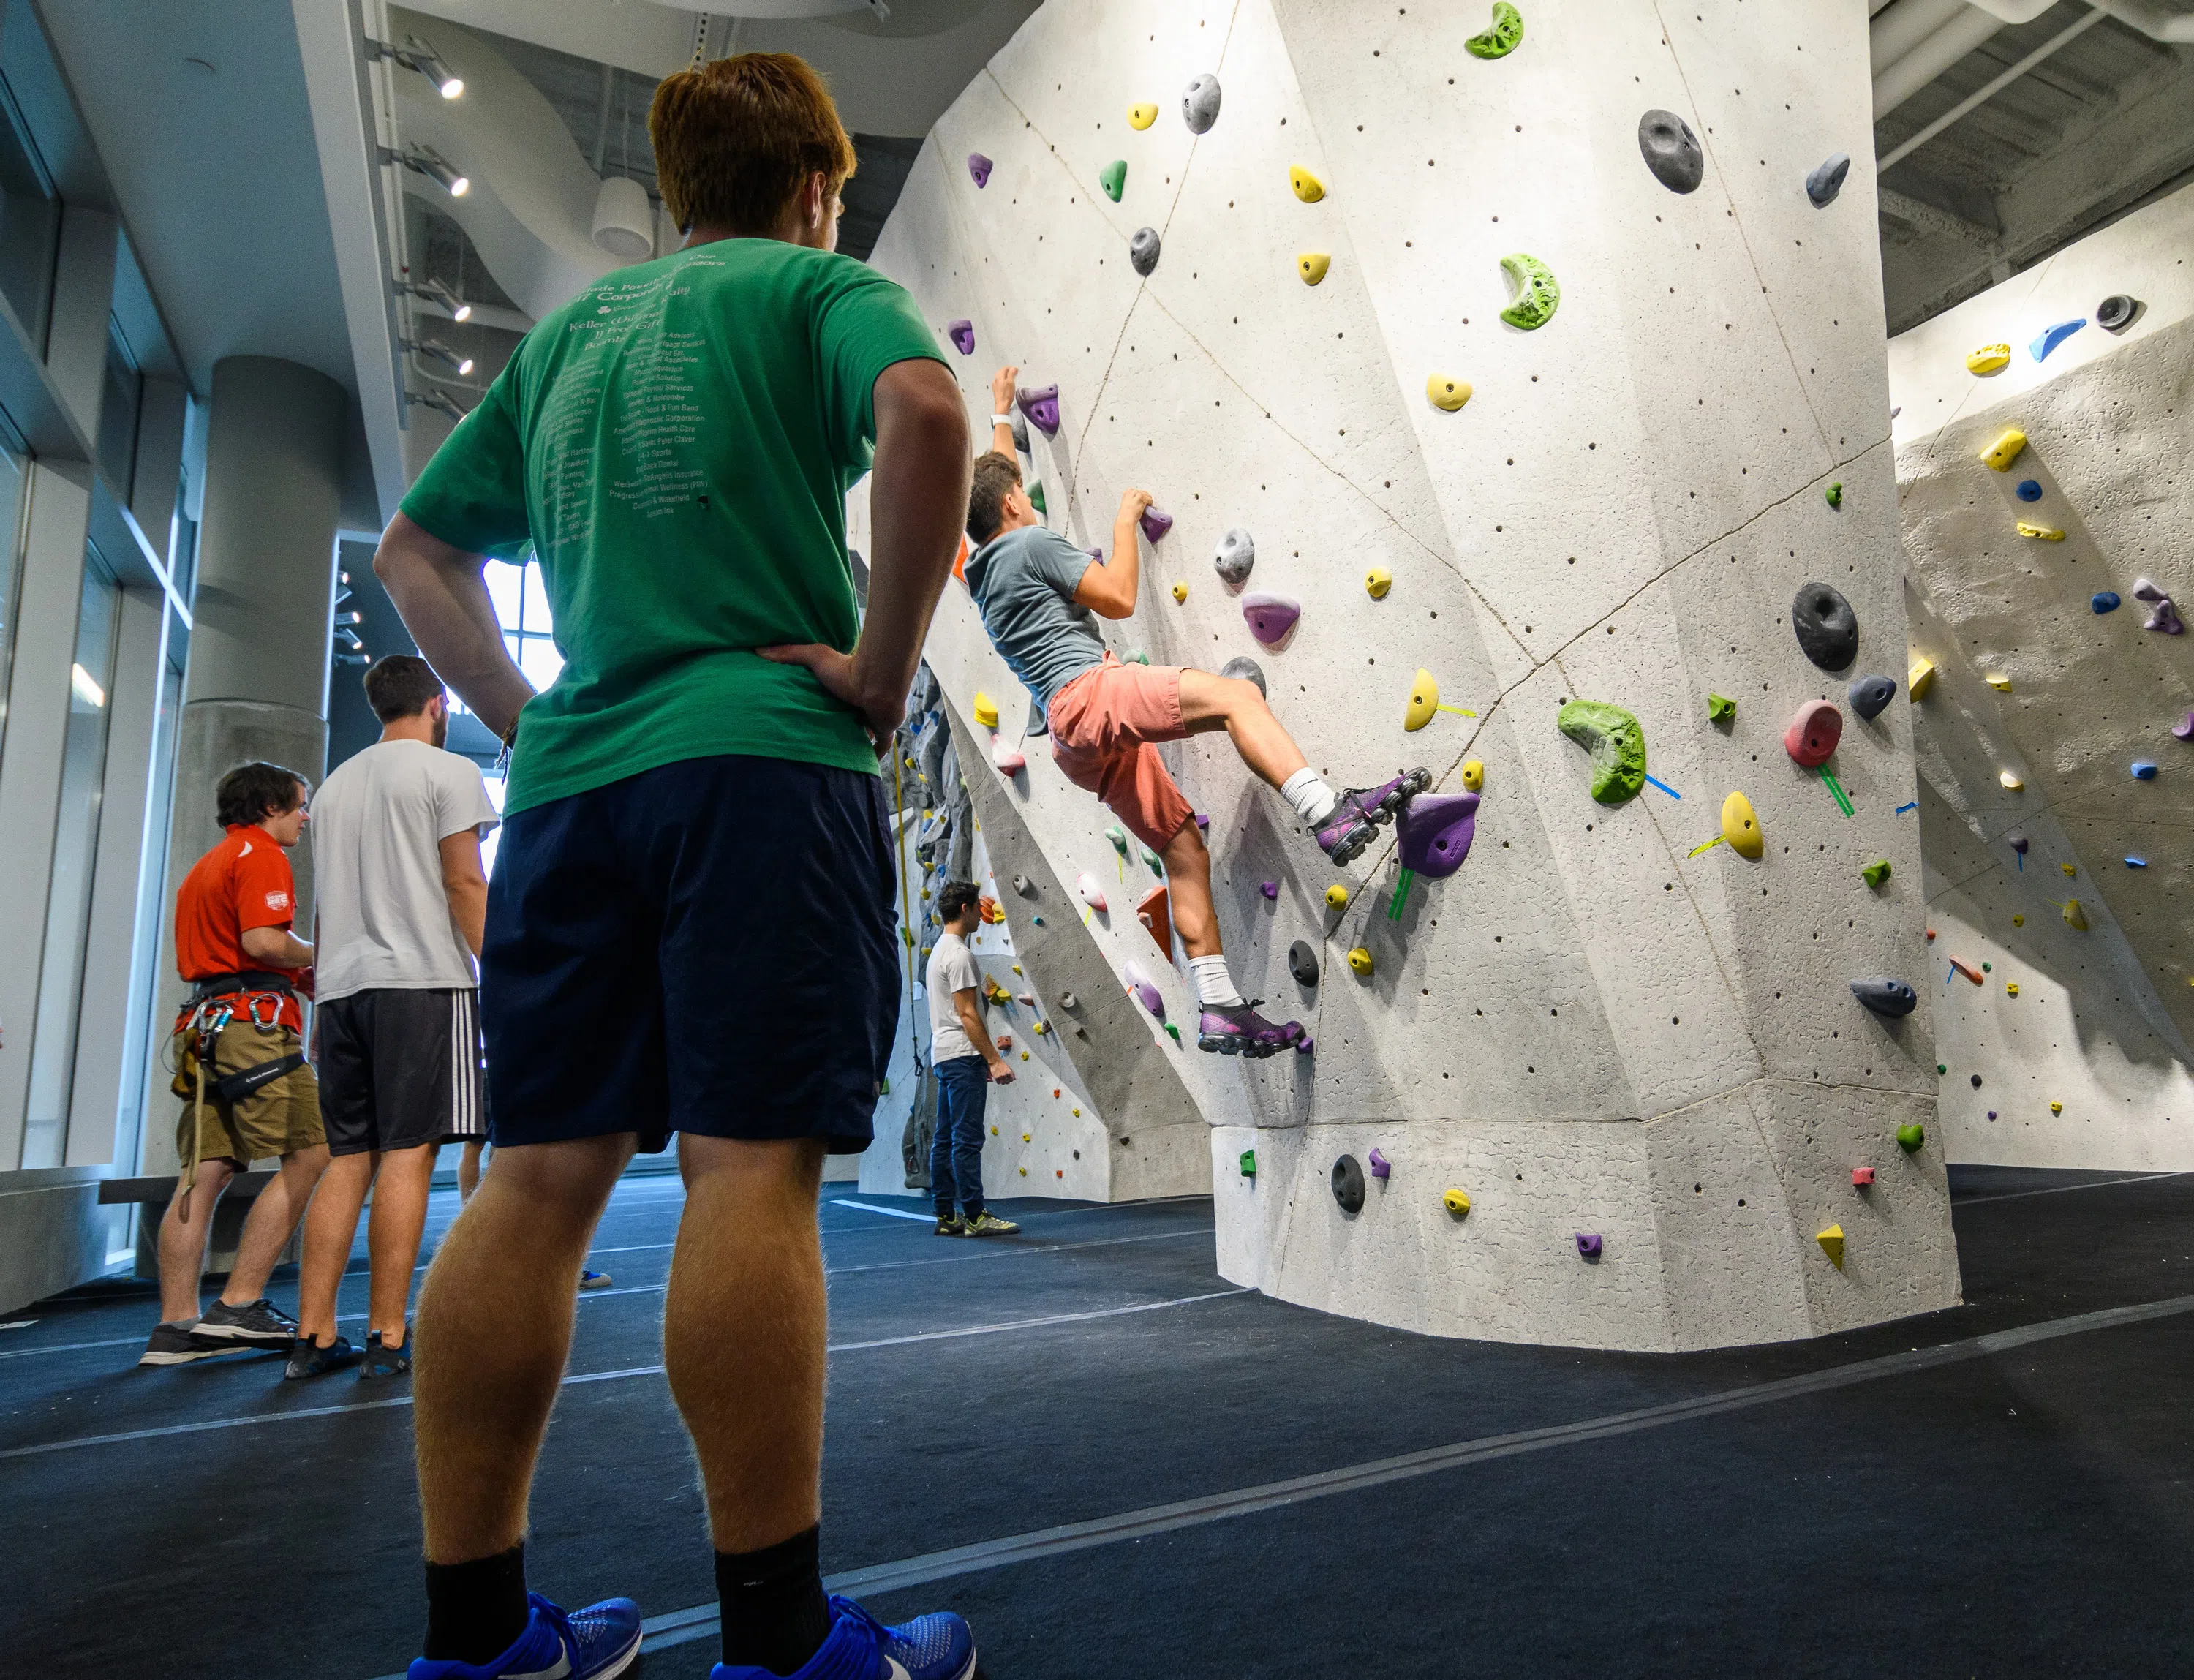 Images of the exterior and interior of UConn's Student Recreation Center